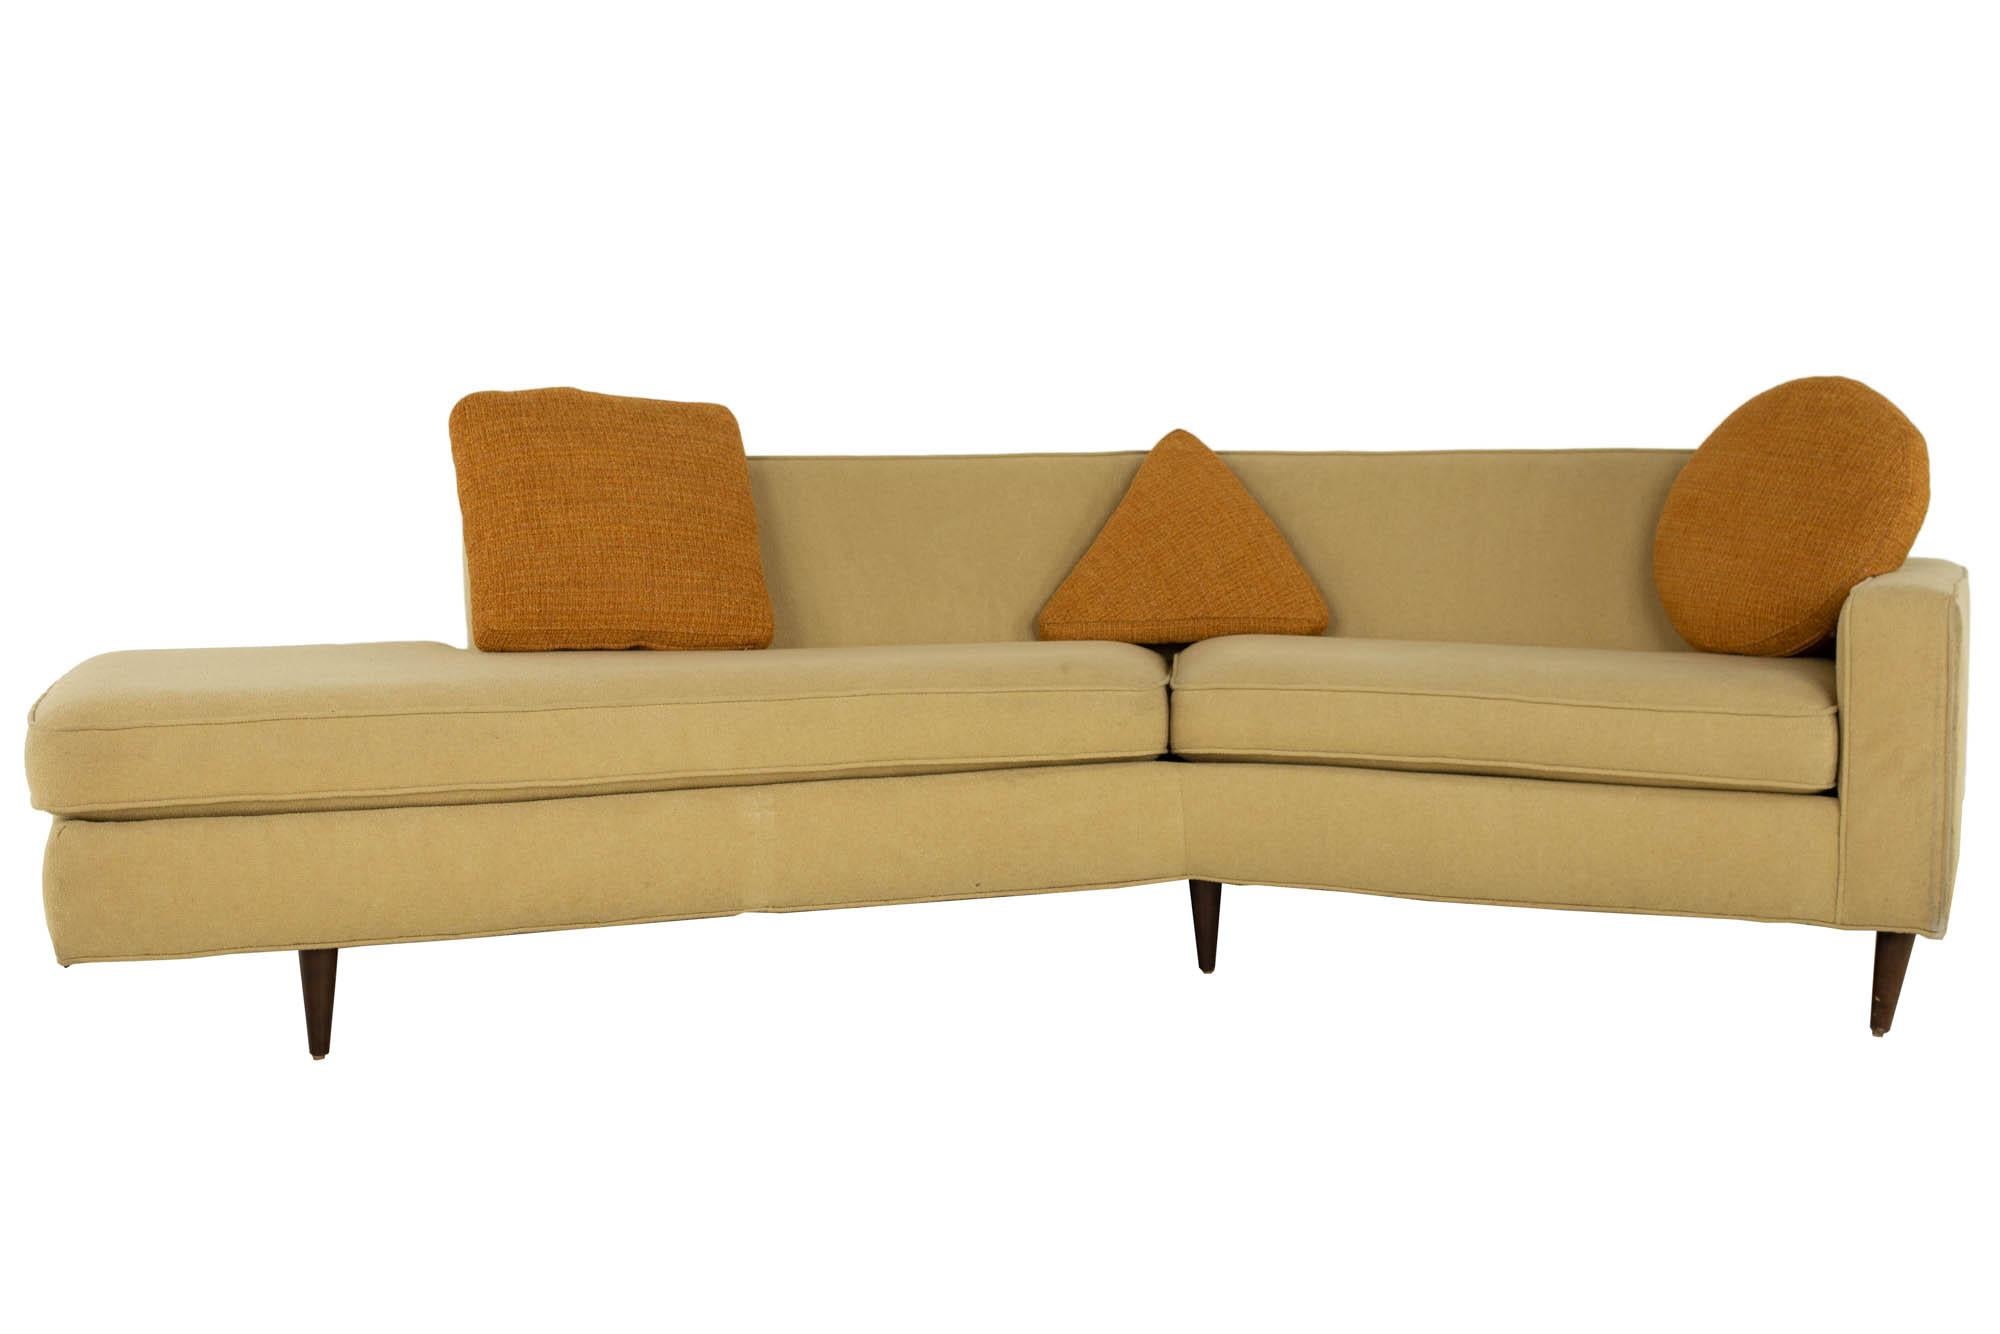 Upholstery Thayer Coggin Mid Century Angle Bumper Sectional Sofa